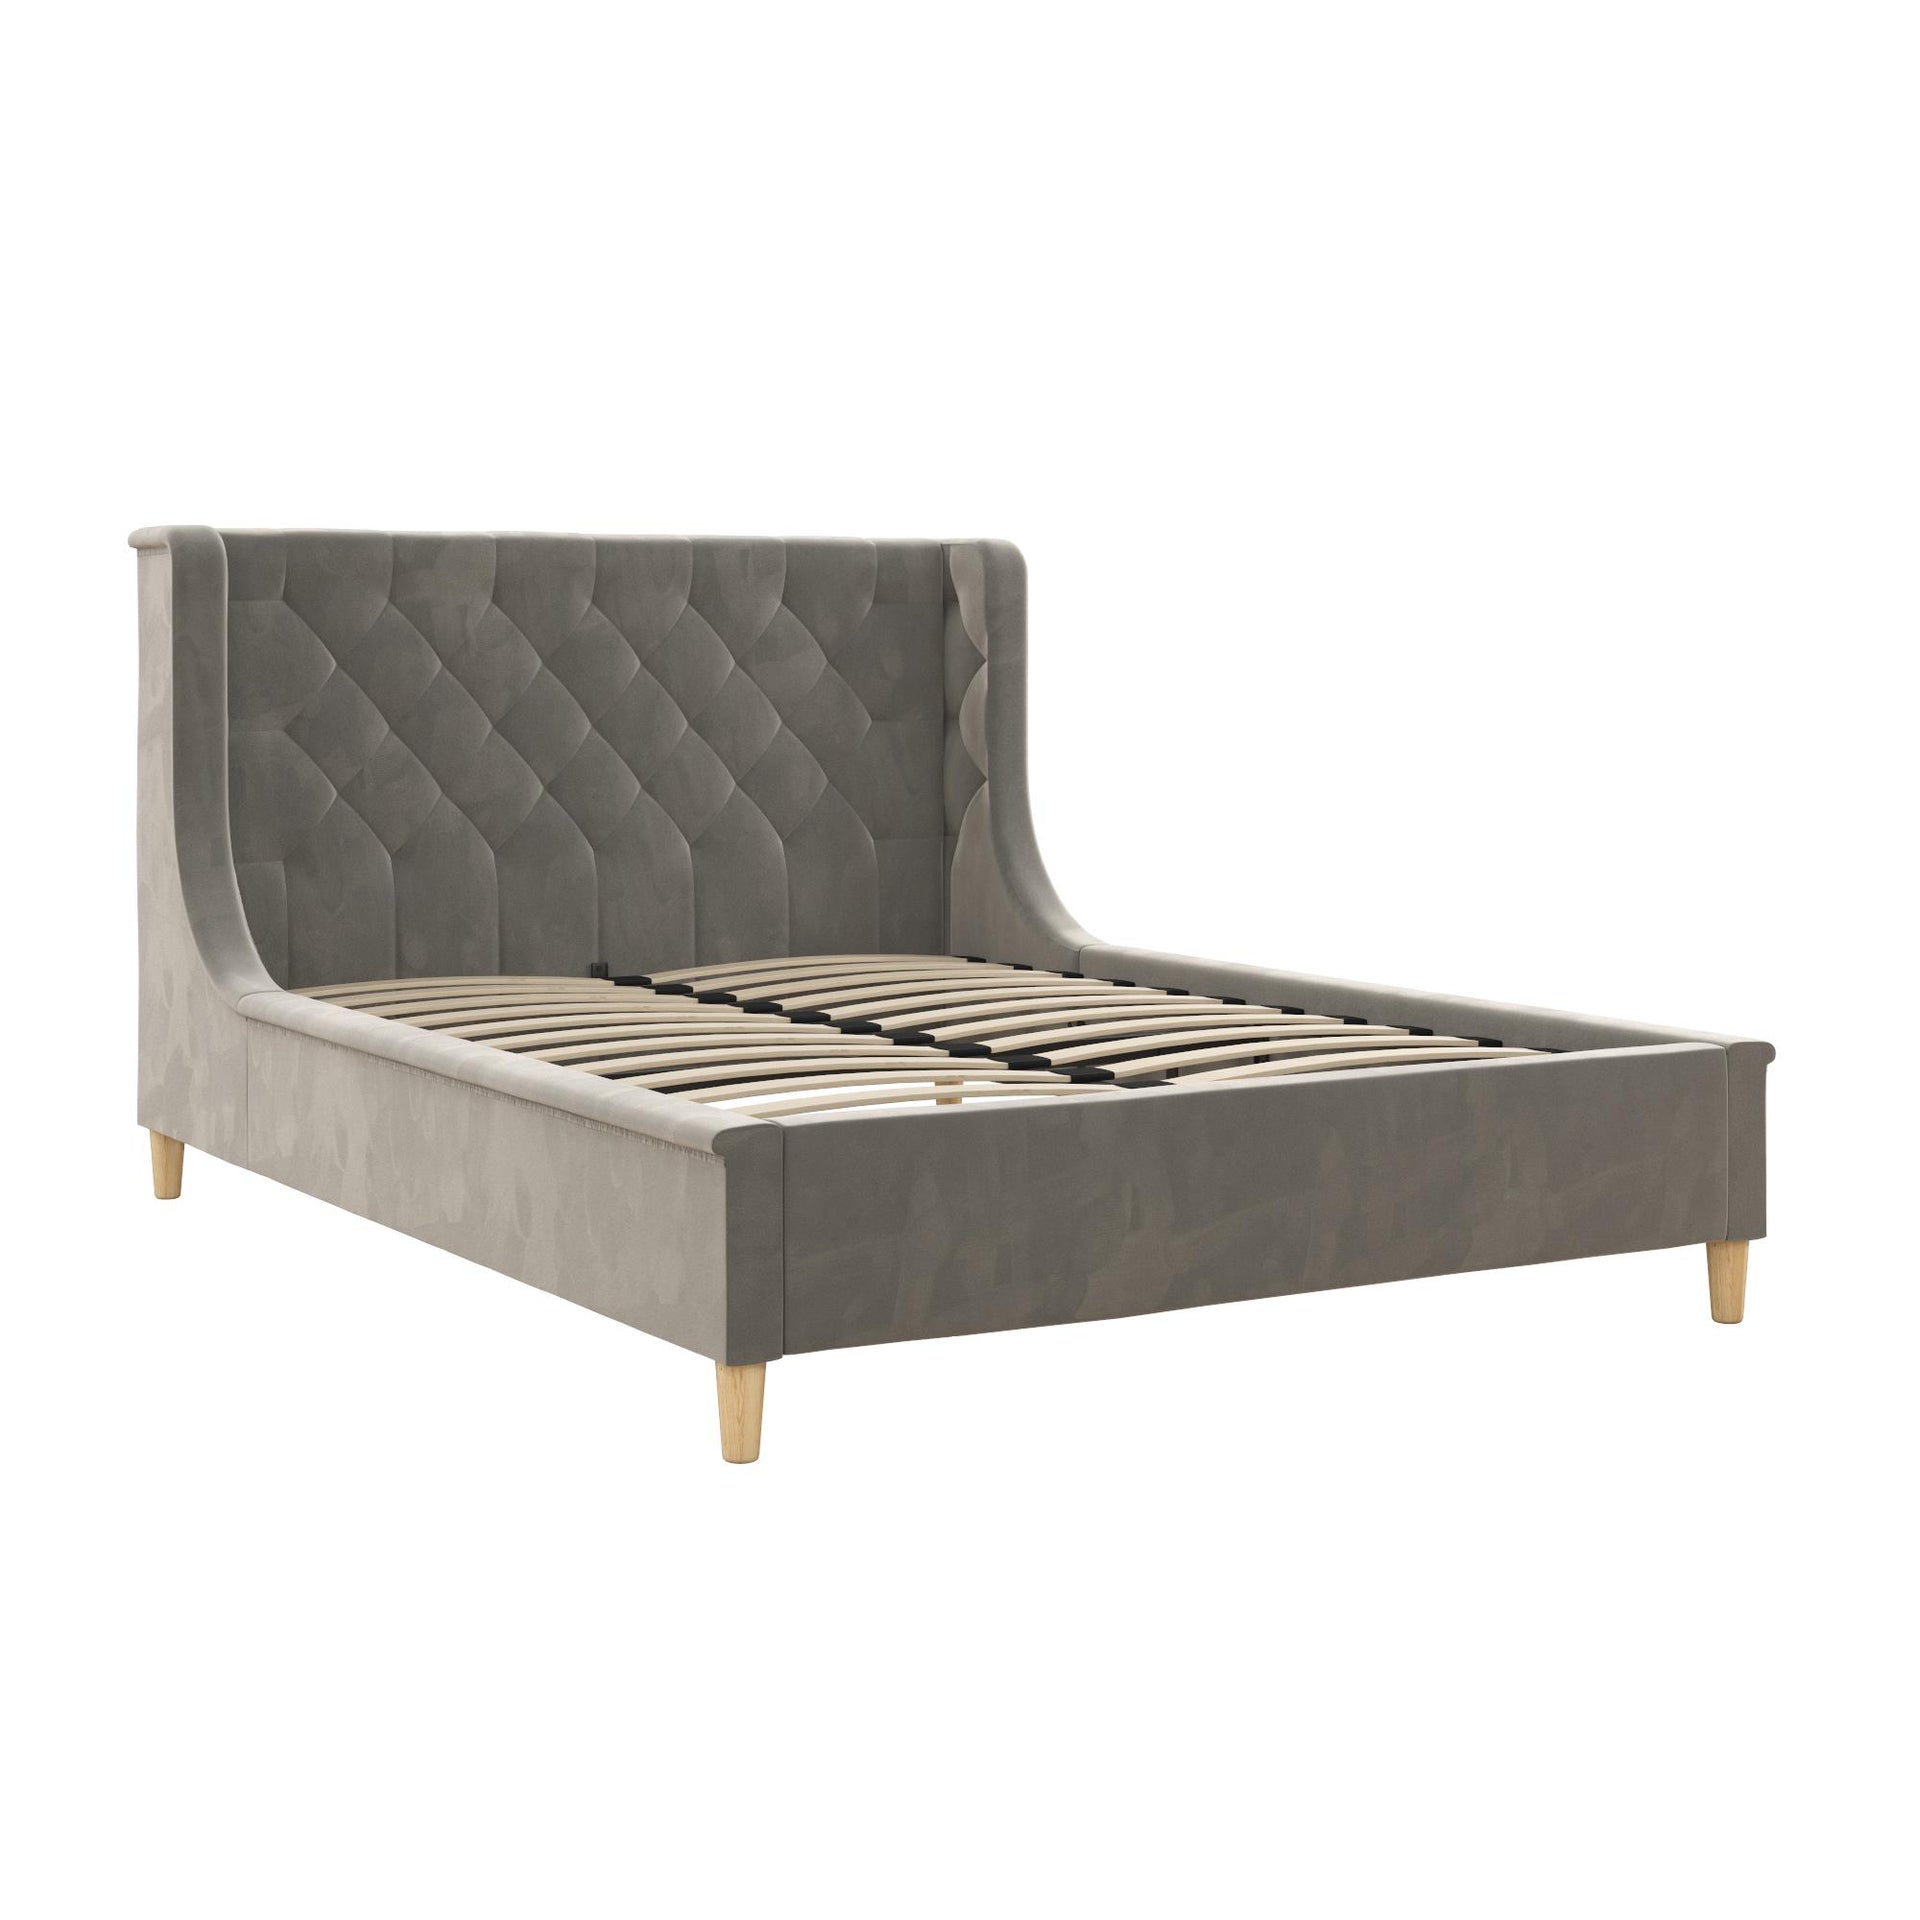 Little Seeds Monarch Hill Ambrosia Upholstered Bed - Gray - Full